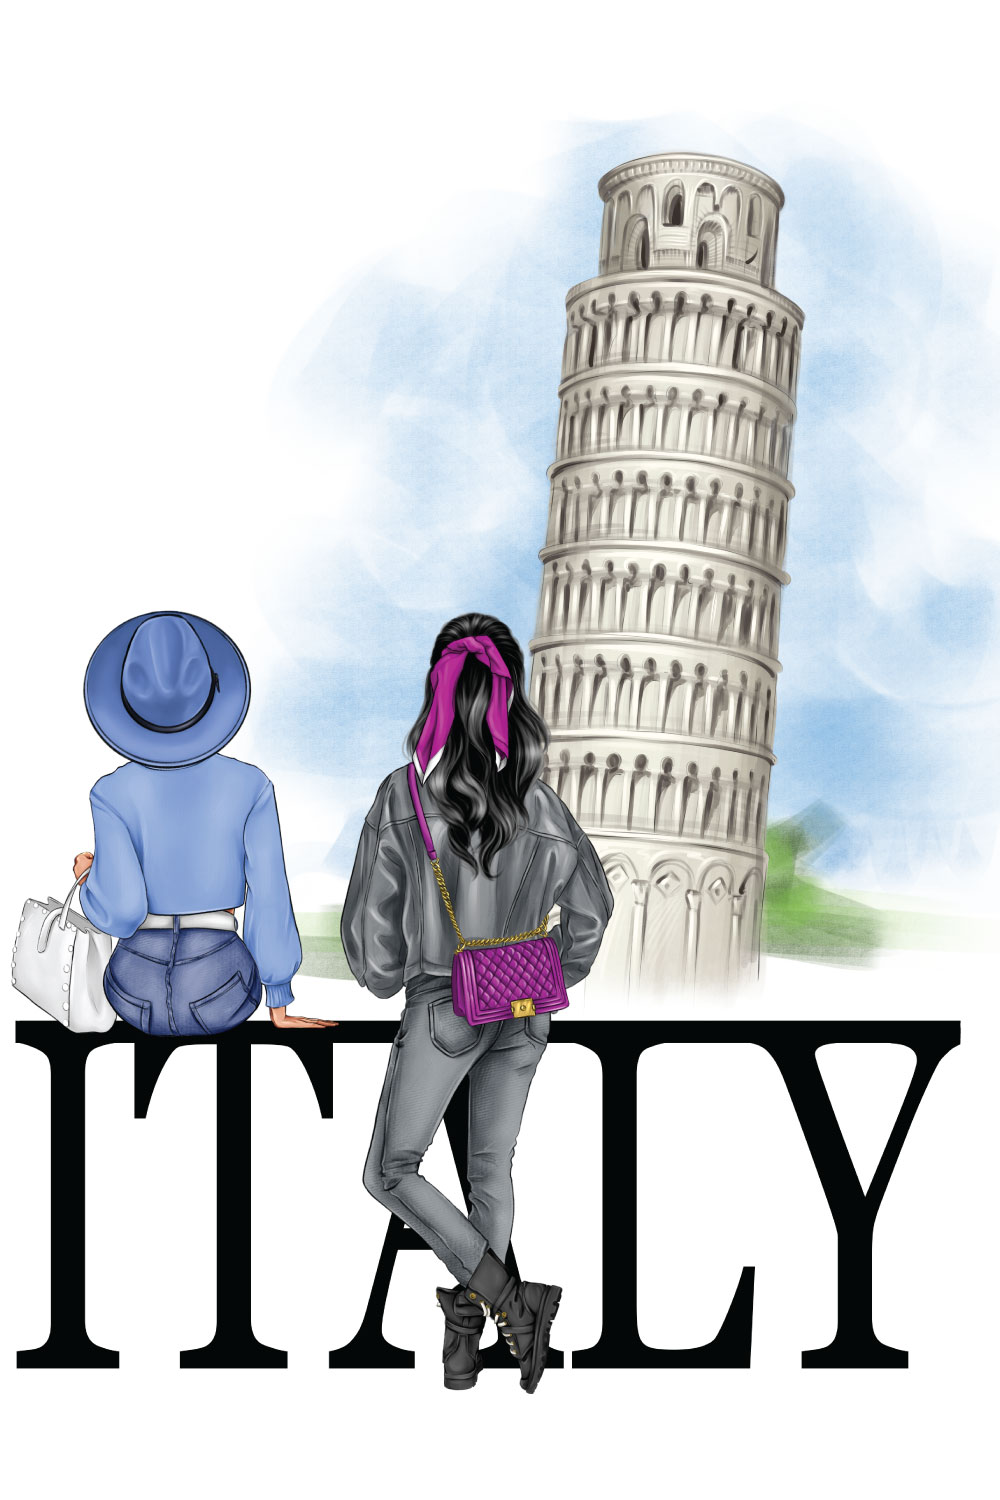 Drawn two girls from the back against the backdrop of the Leaning Tower of Pisa.